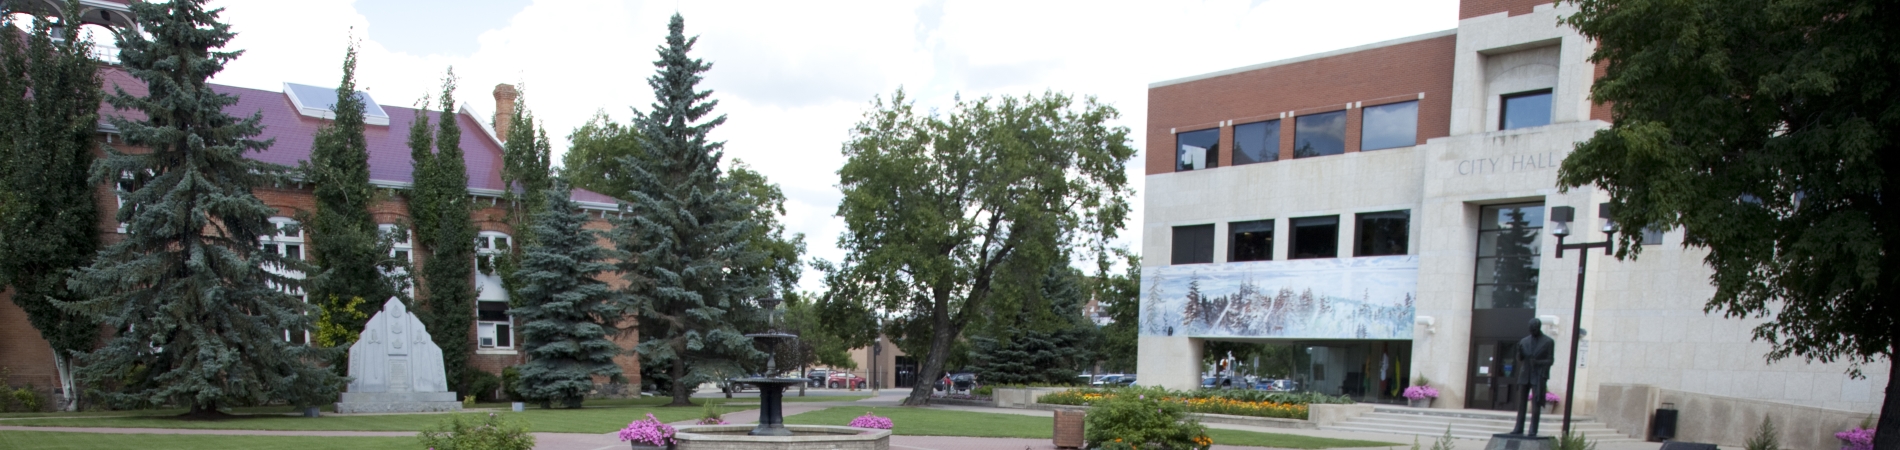 A view of City Hall and Memorial Square in Prince Albert